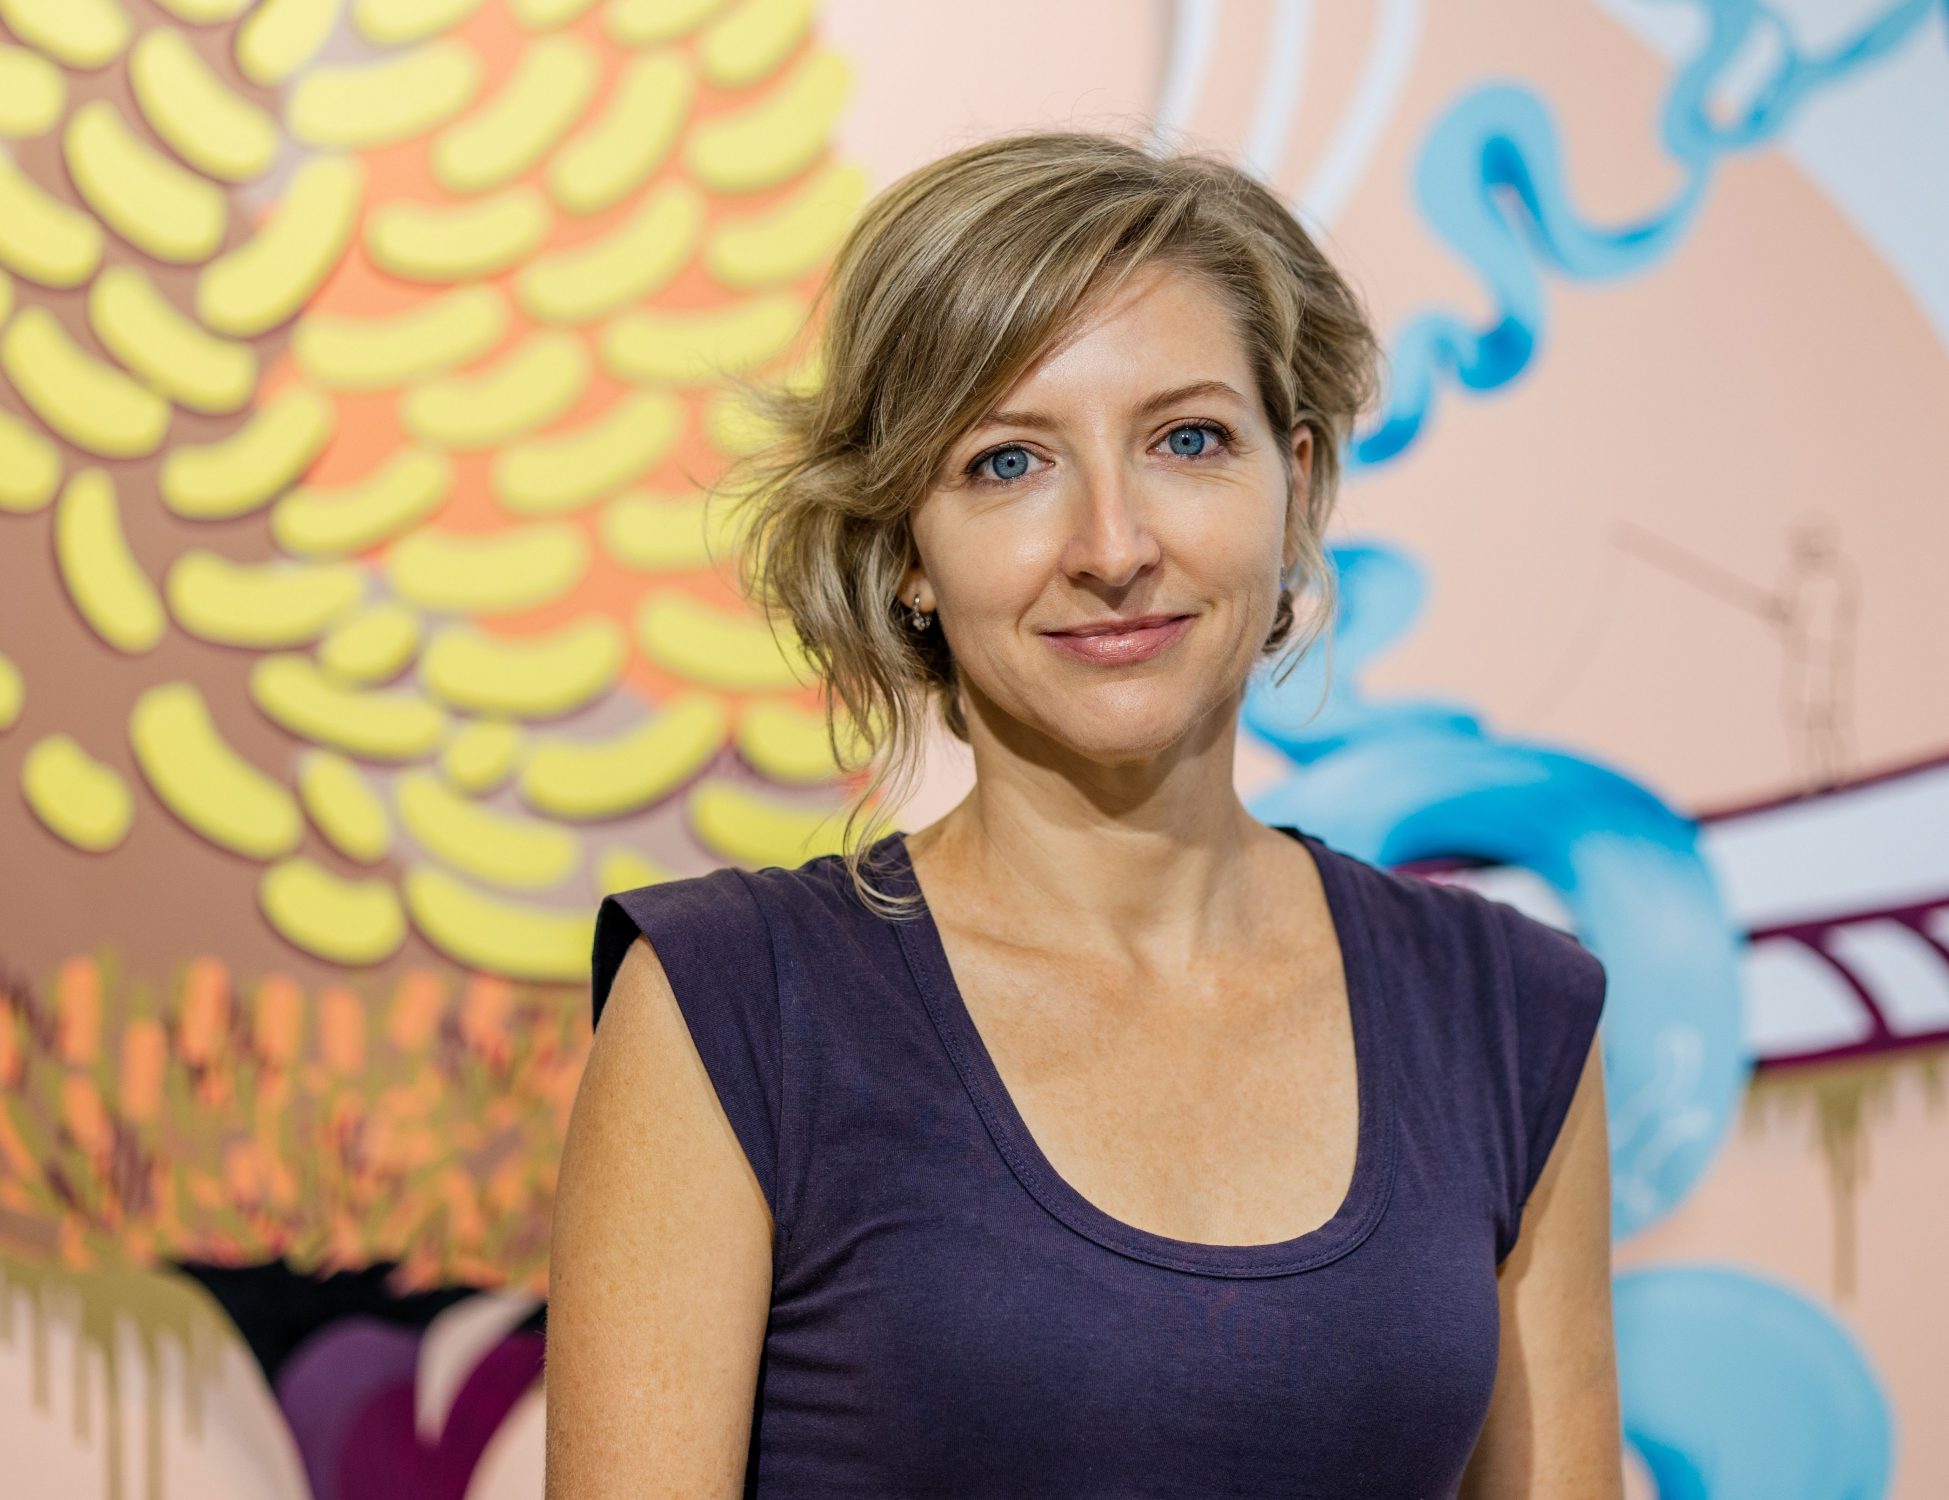 Meet the Host: Sarah Lyttle Shares Her Love of Painting